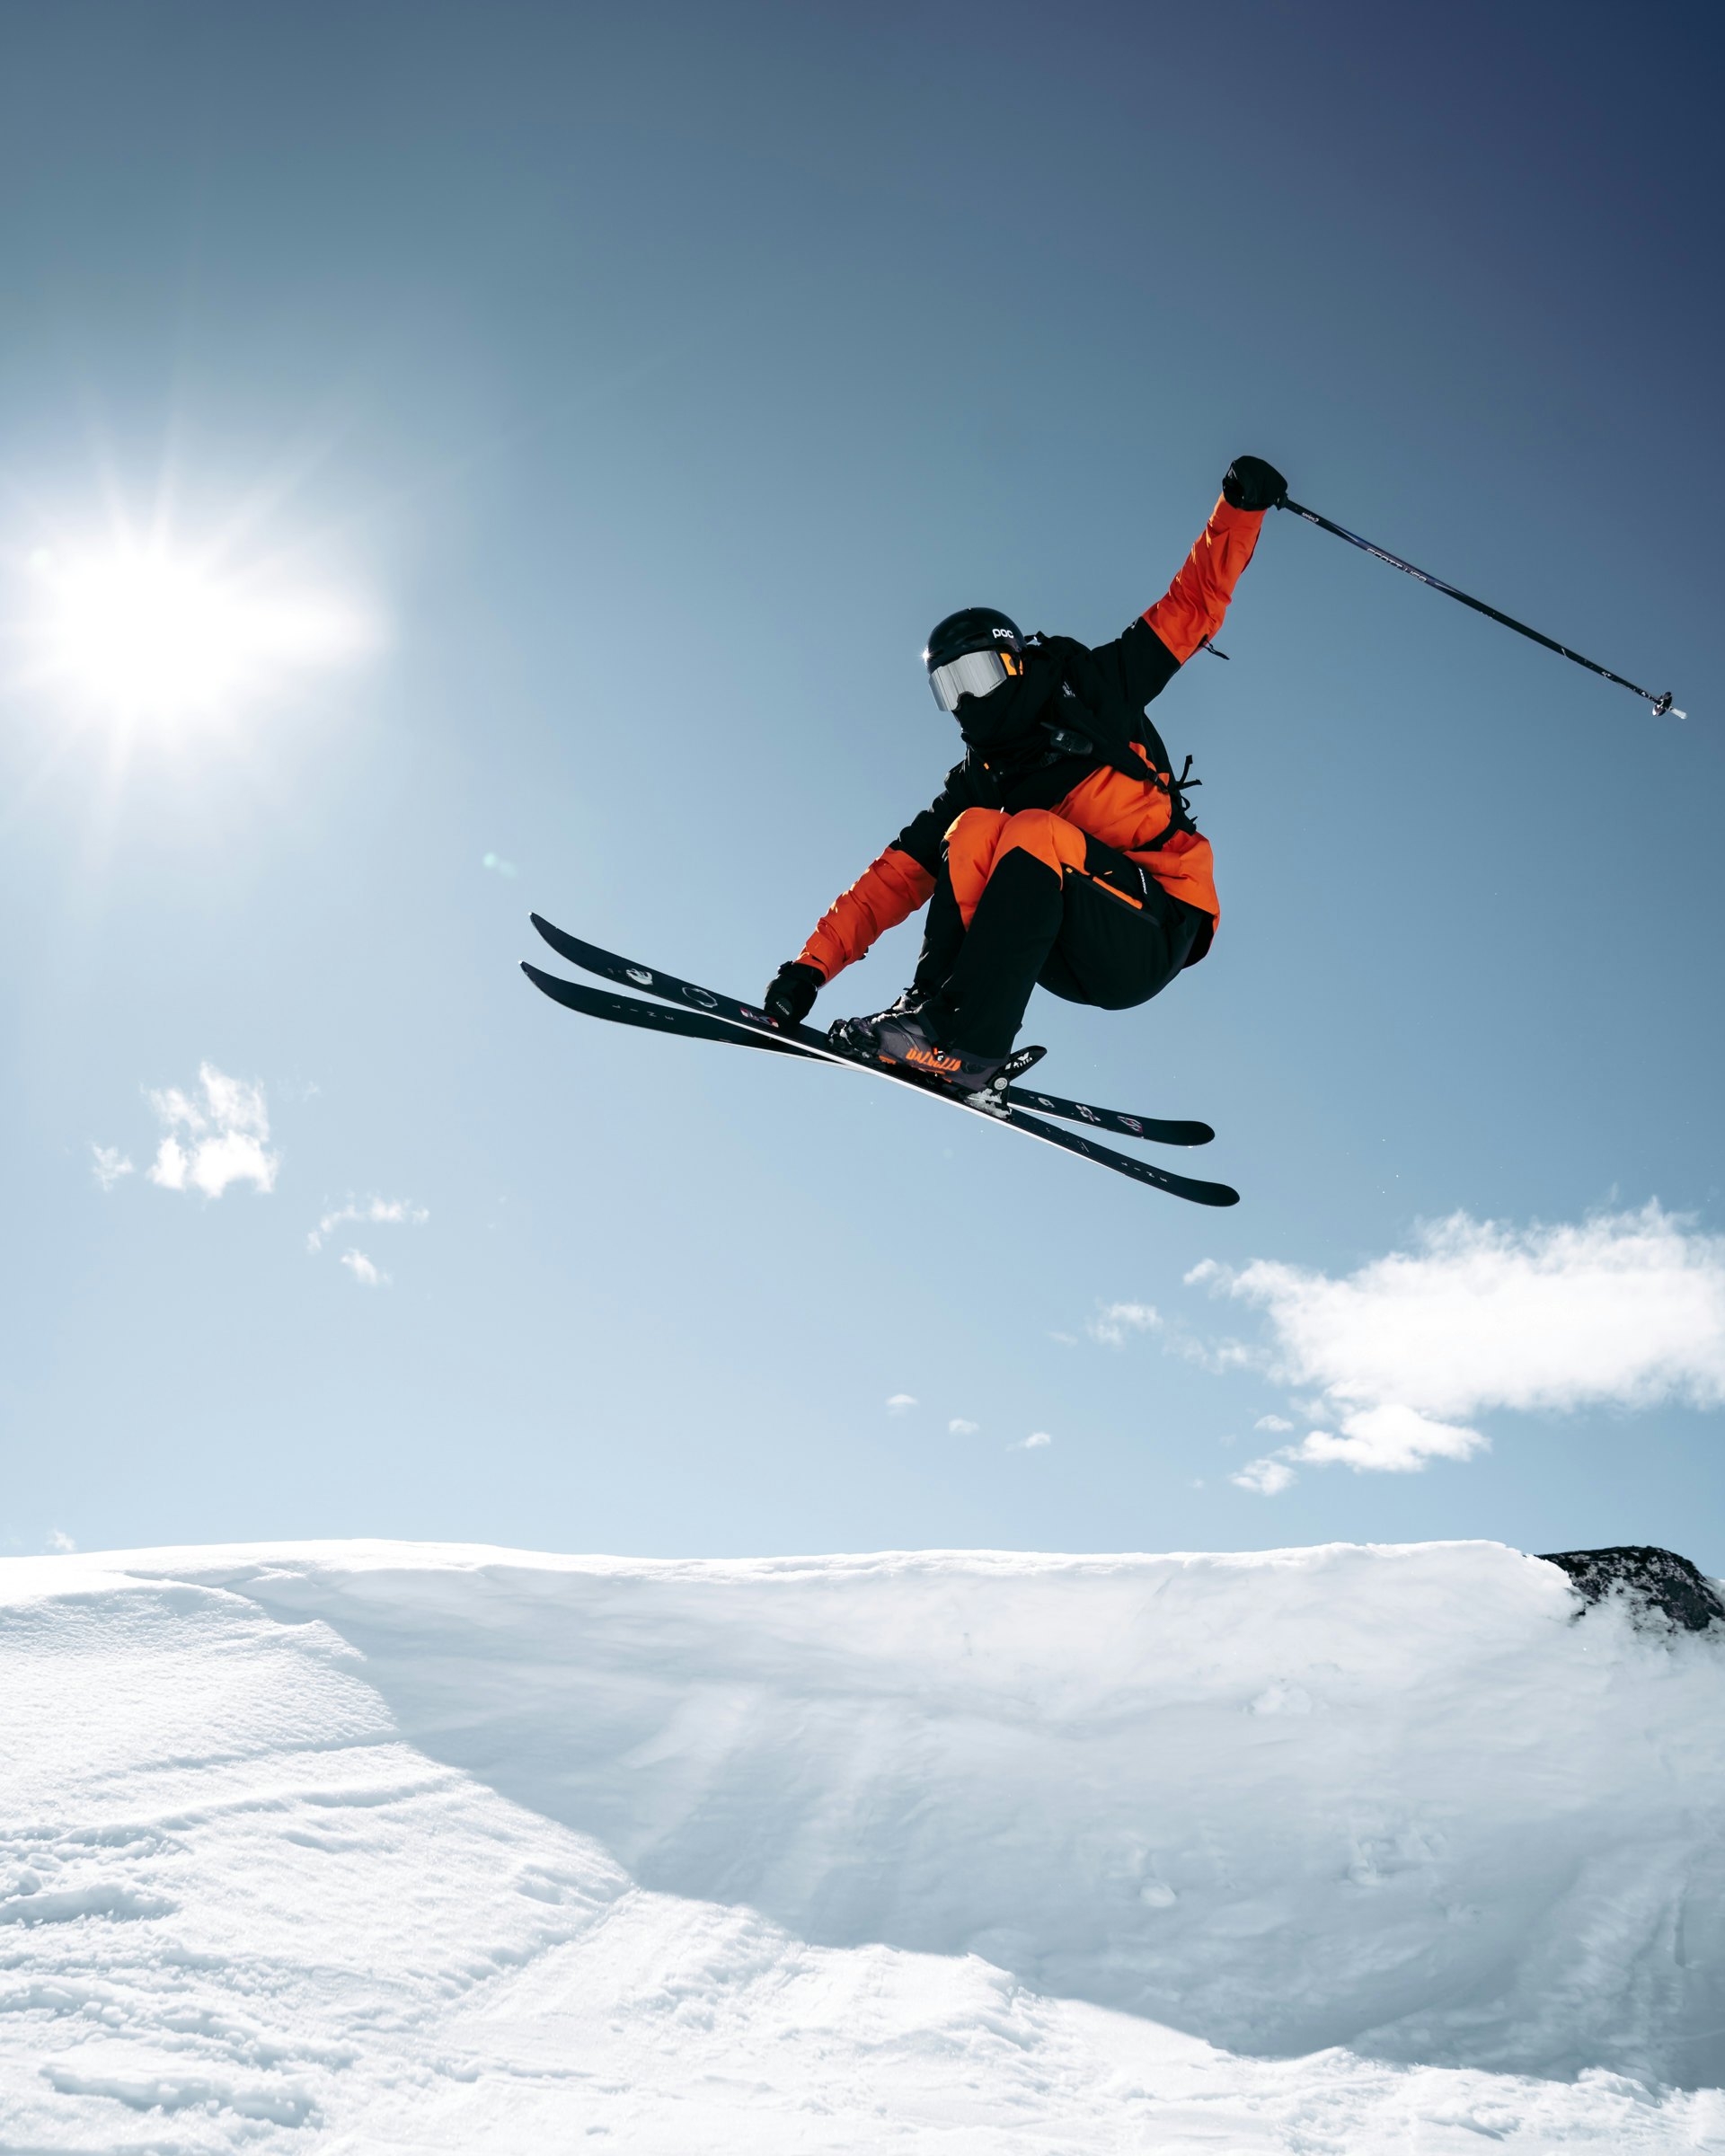 How to do shifty on skis